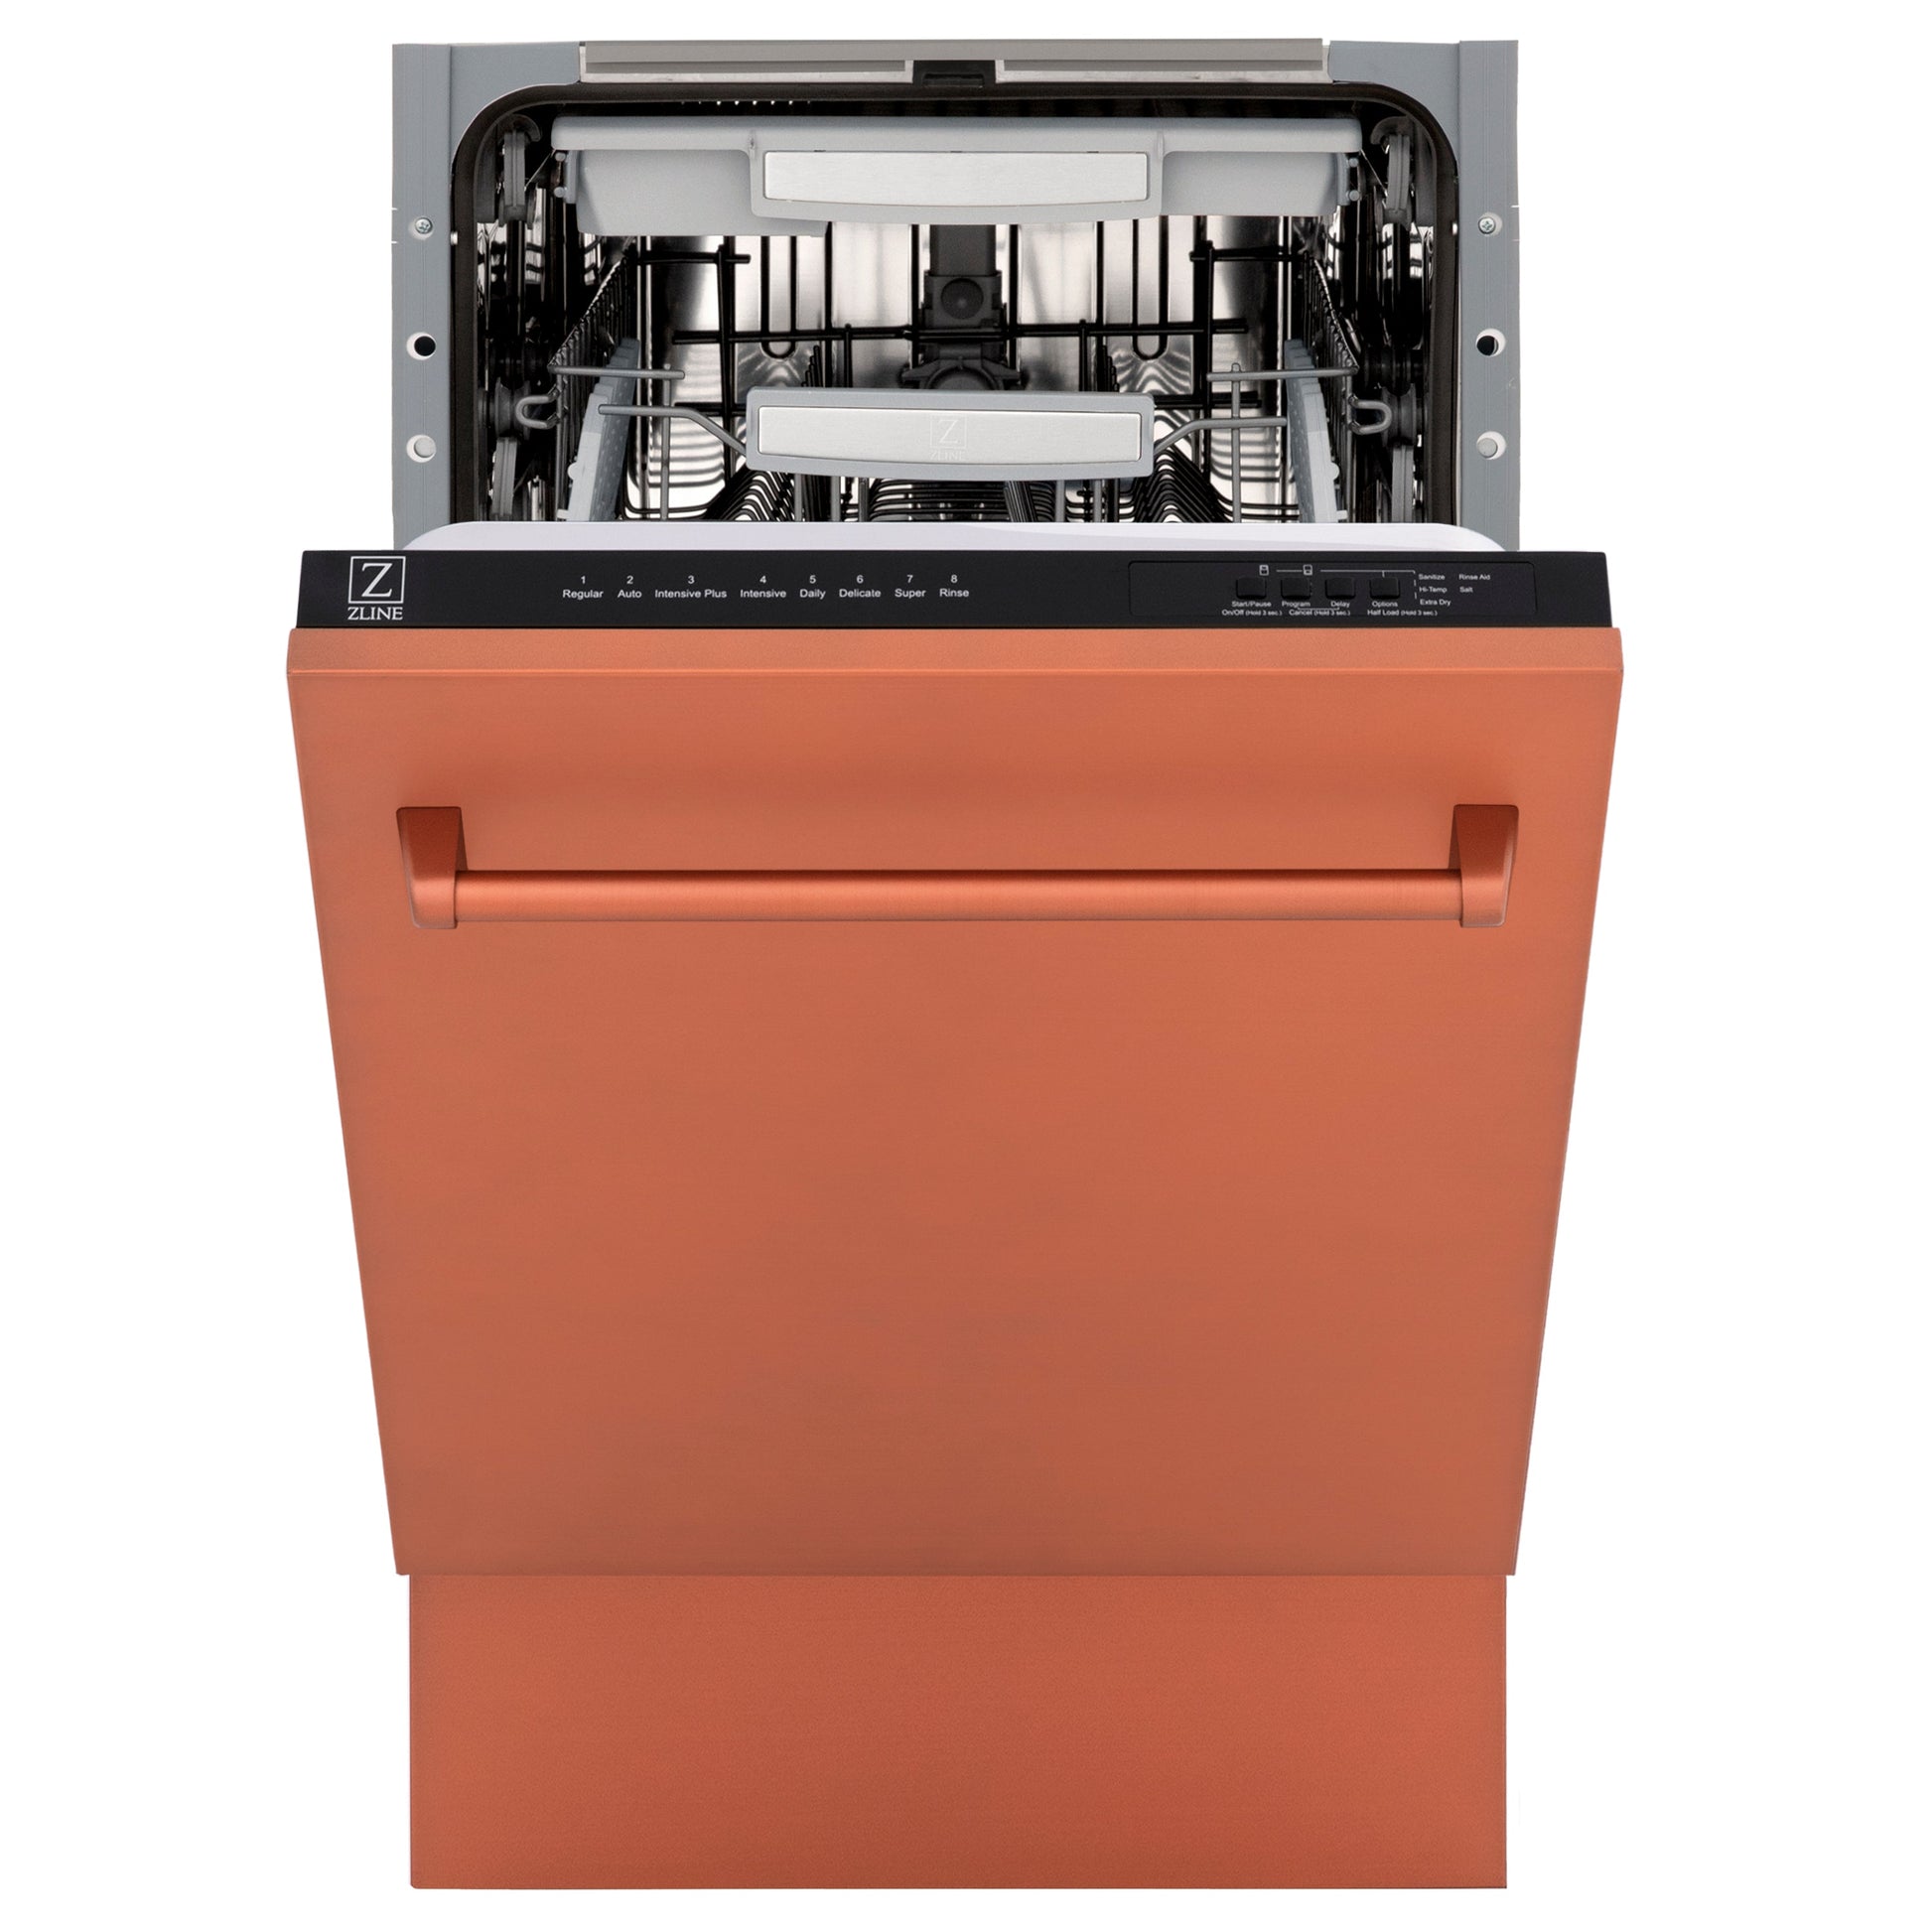 ZLINE 18" Tallac Series 3rd Rack Top Control Dishwasher - Stainless Steel Tub with Color Options